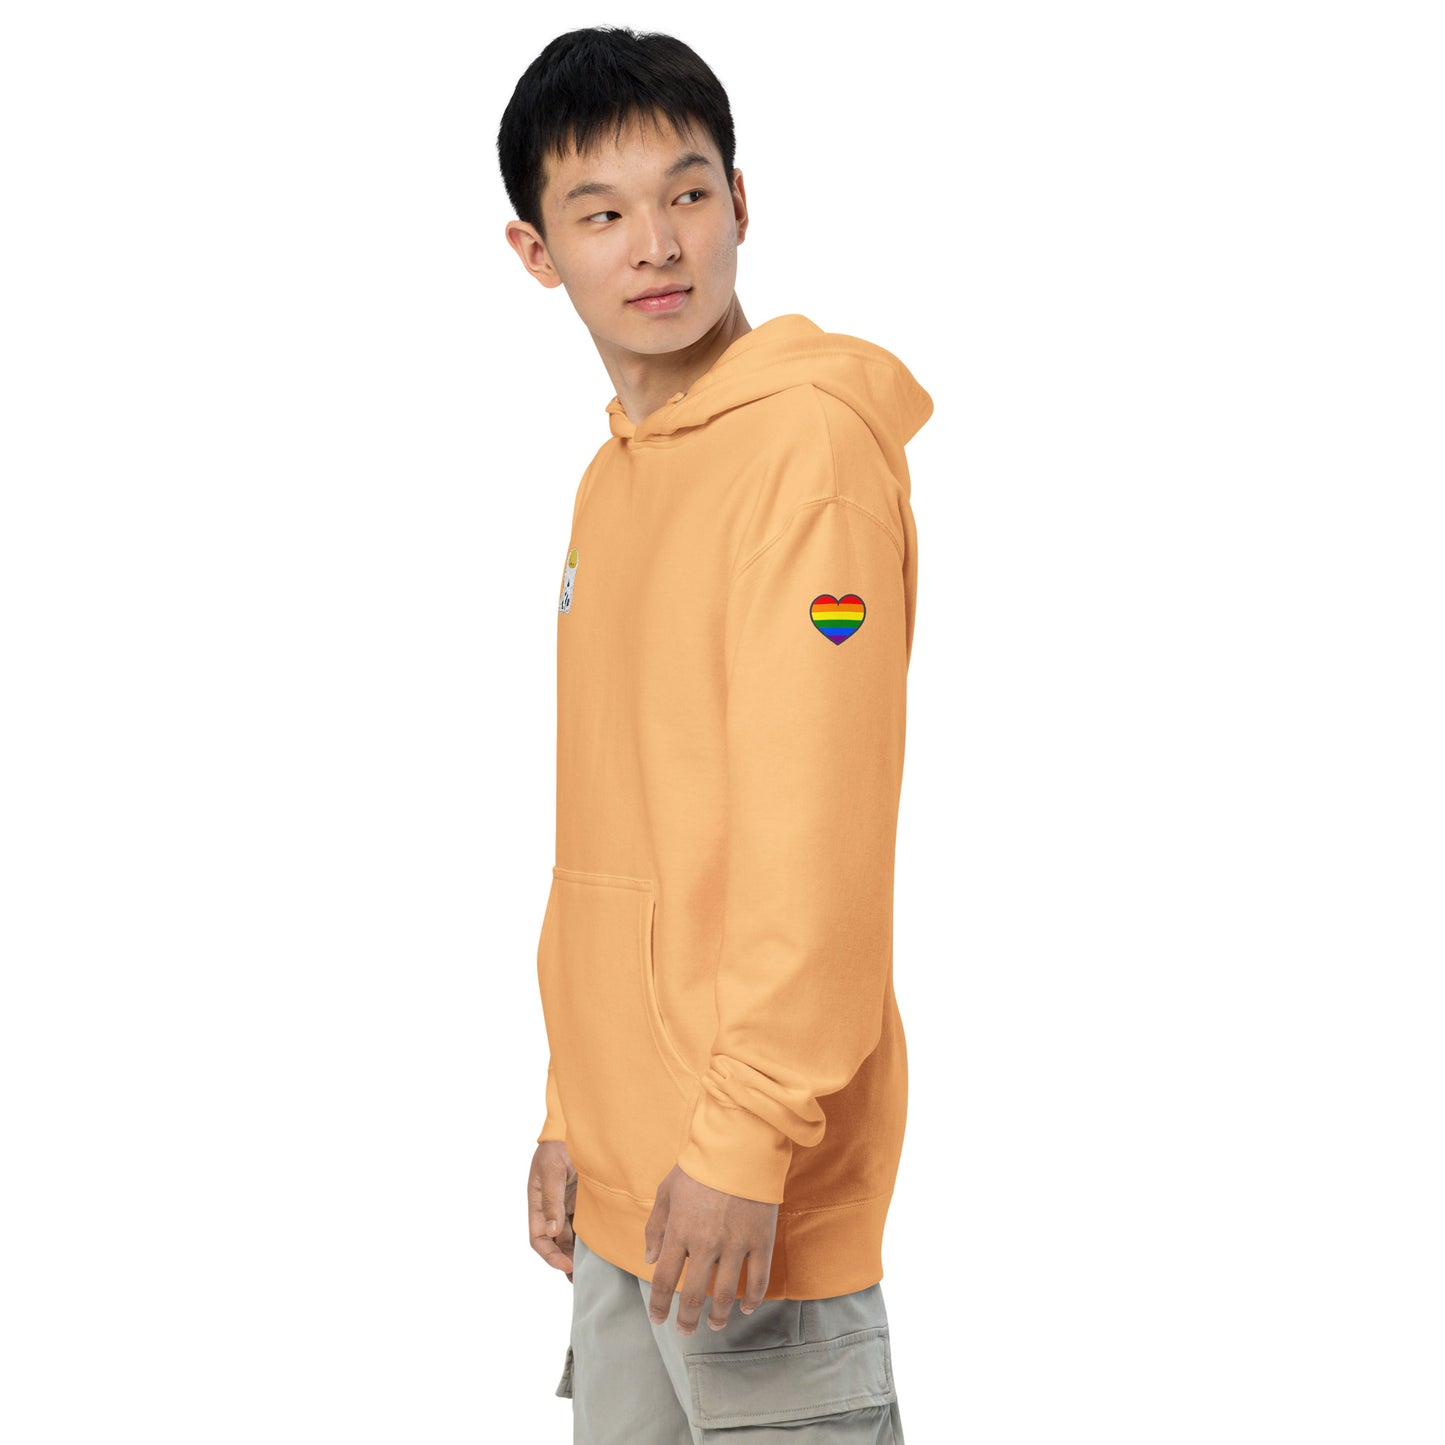 Jelly Eggy Compainion Hoodie.